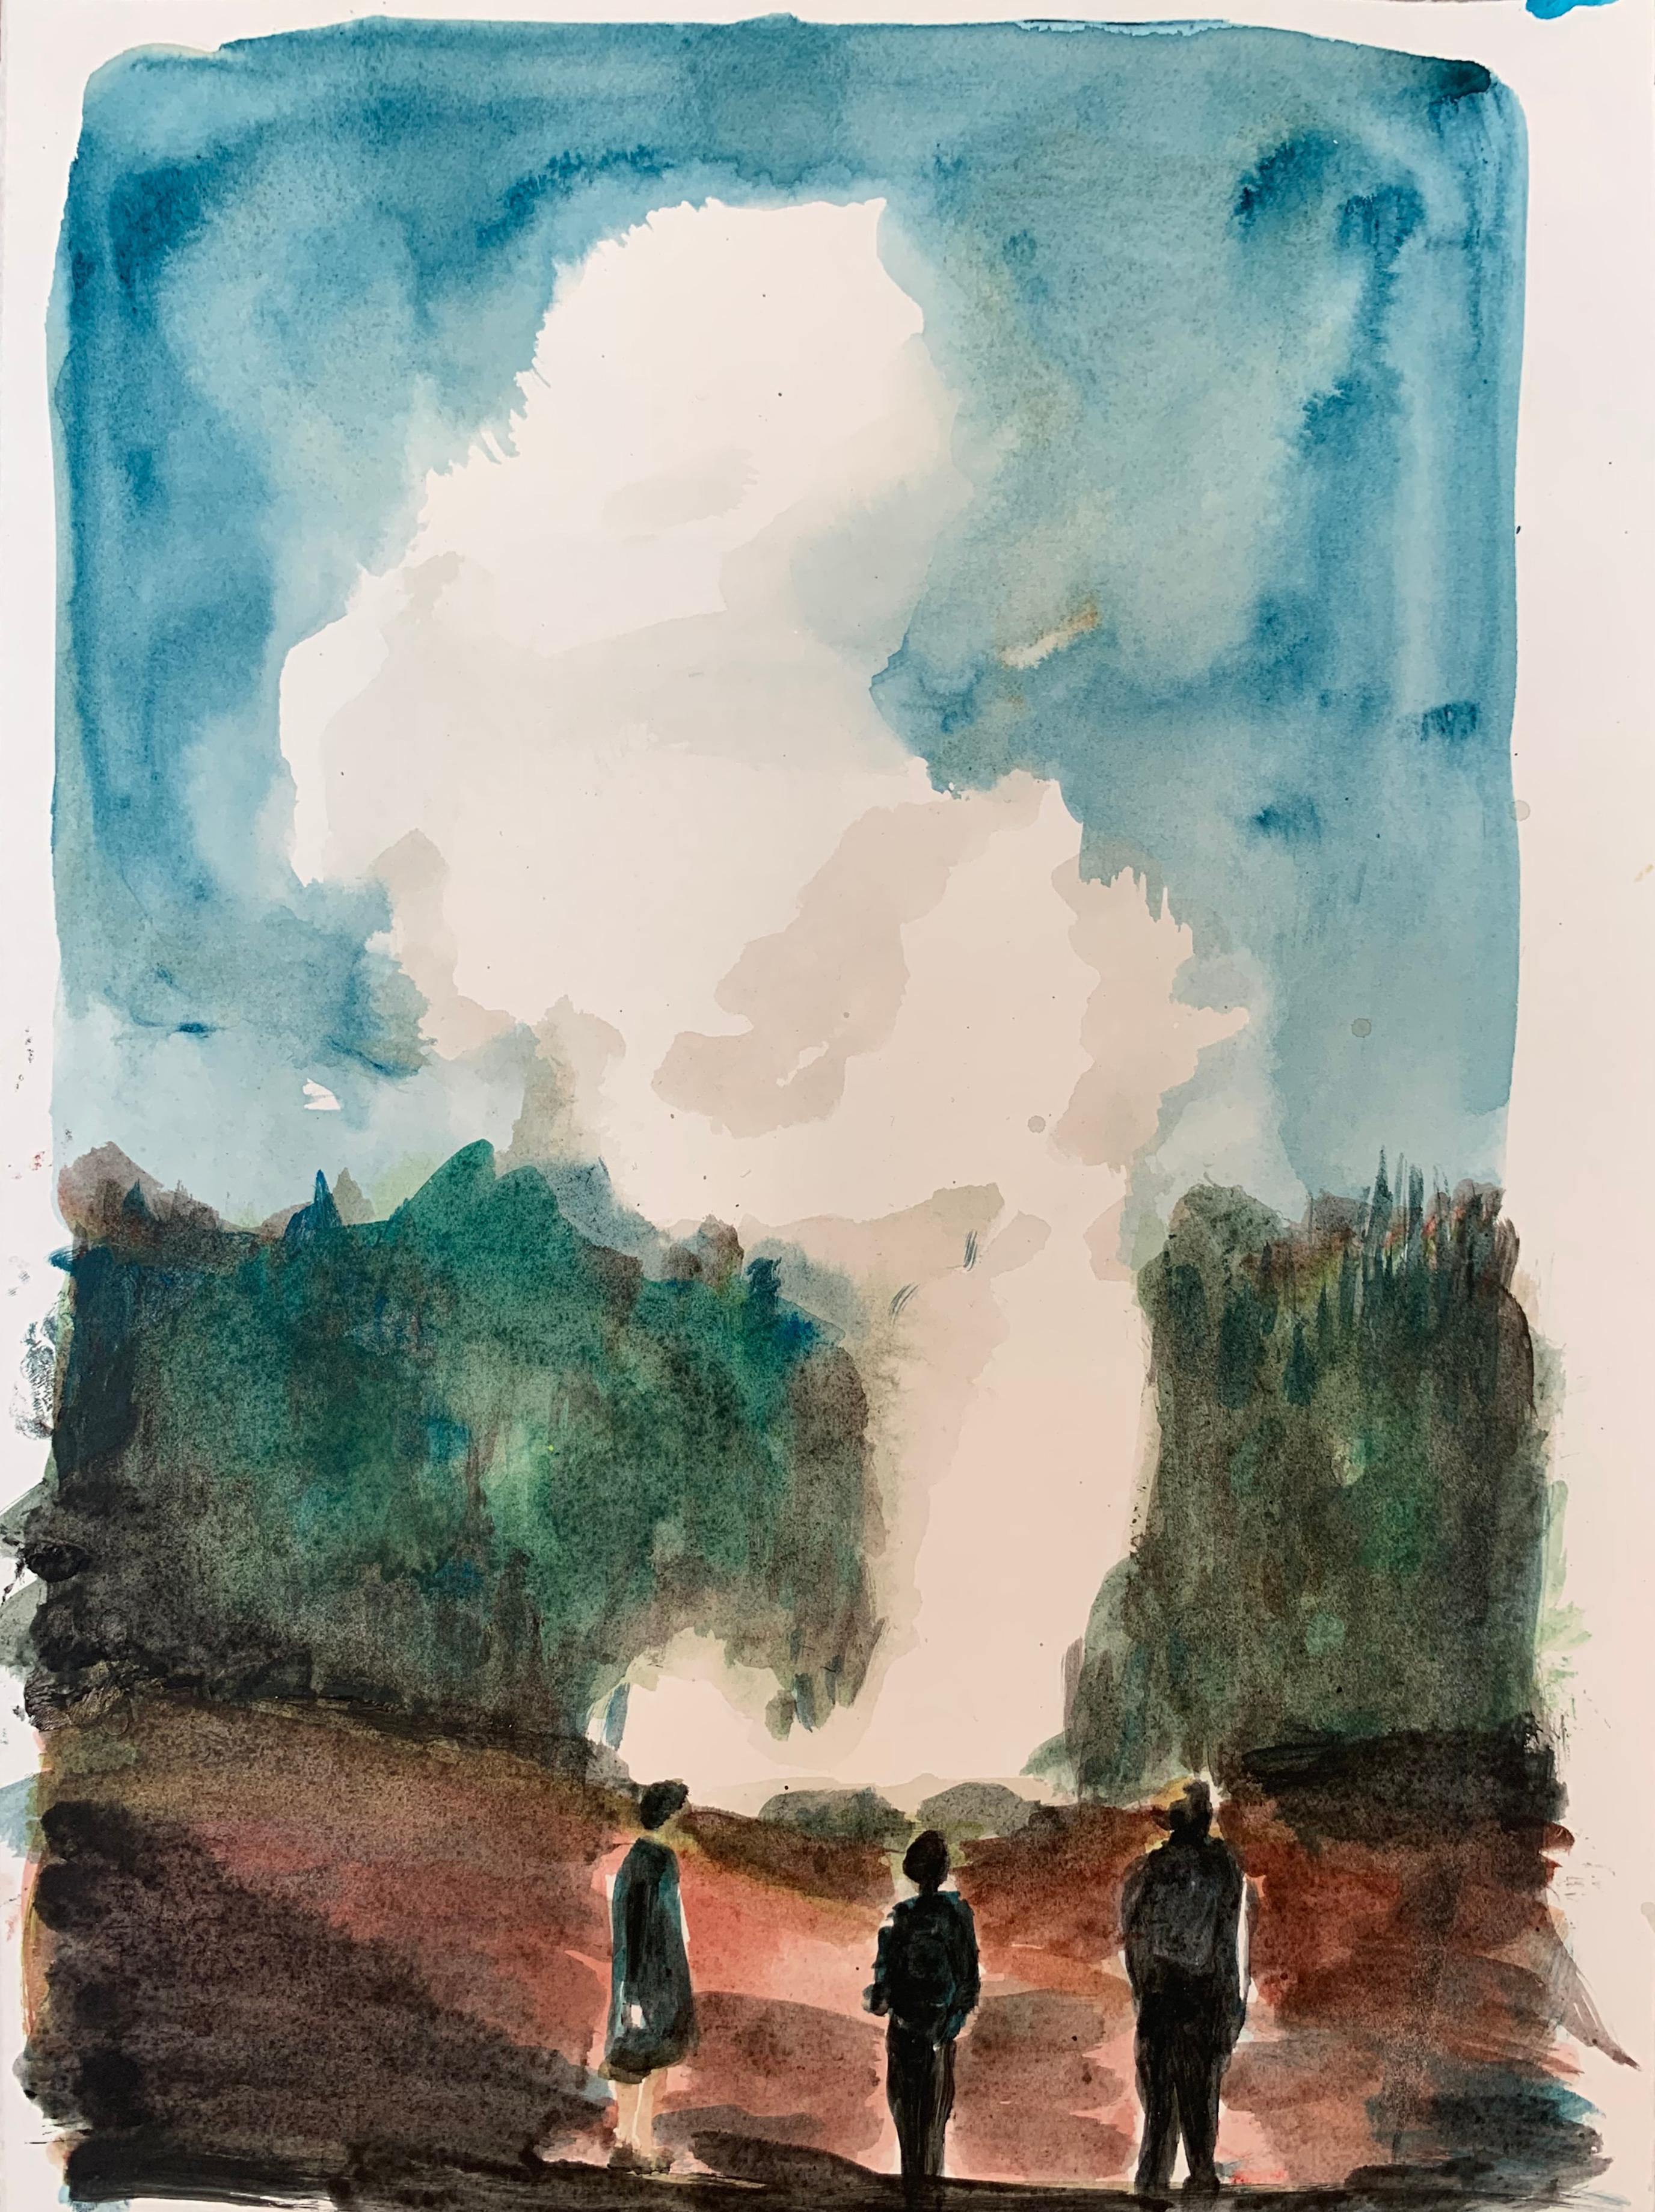 A drawing of Jasper Hagenaar, where three people are wandering in a landscape/forrest, looking at the sky which is filled with clouds. 

Sincerity and light playfulness coexist within the scope of boyhood in a merely broad yet autobiographical sense